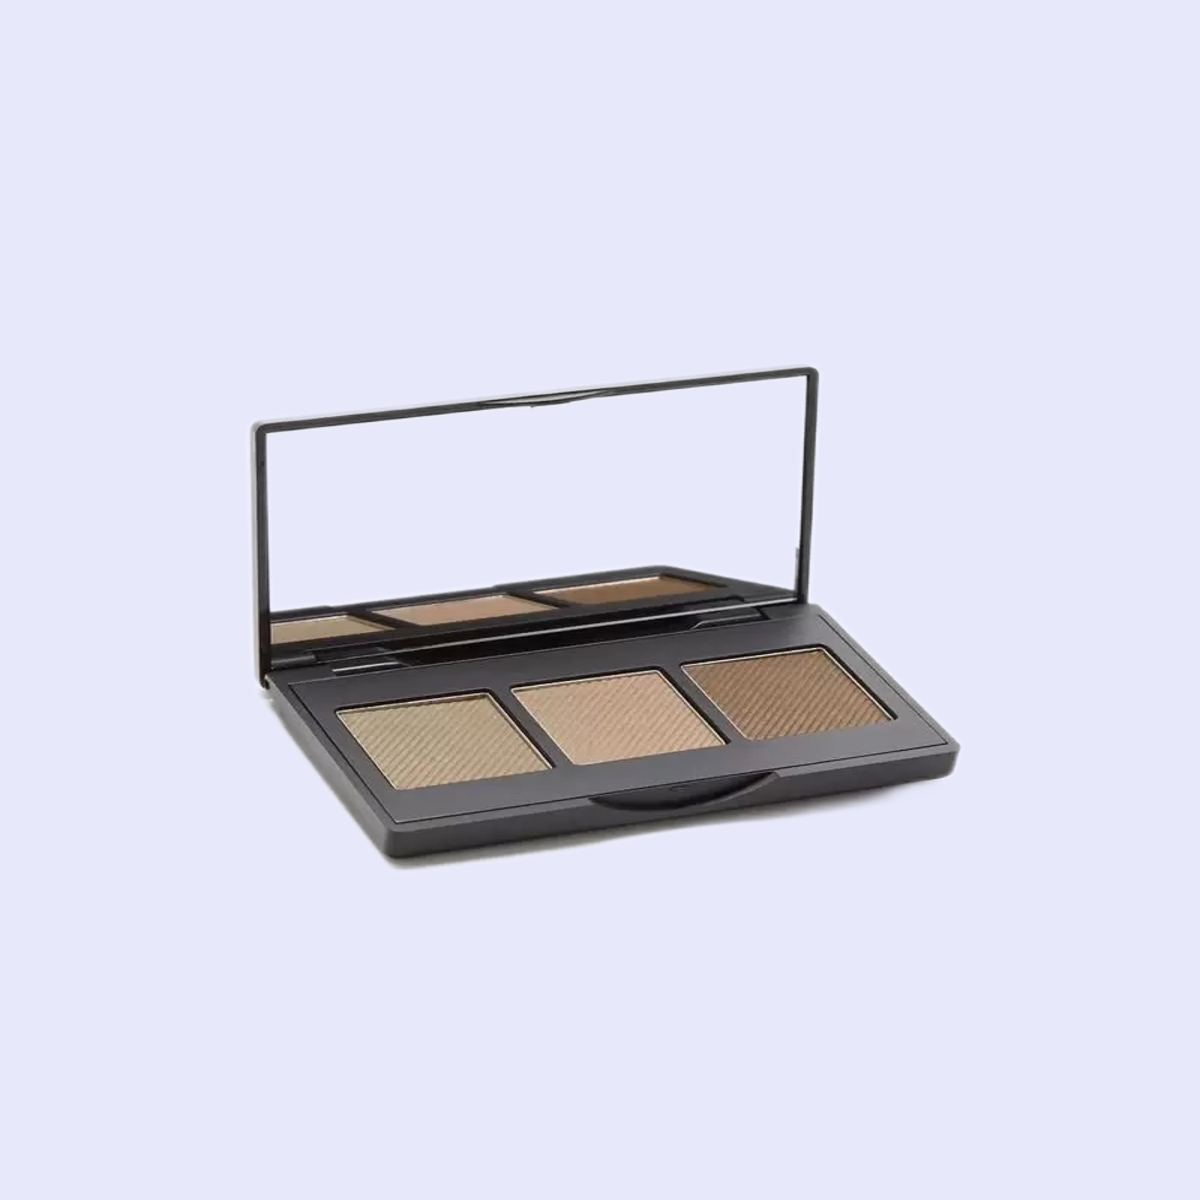 The BrowGal- Convertible Brow Palette Light 03